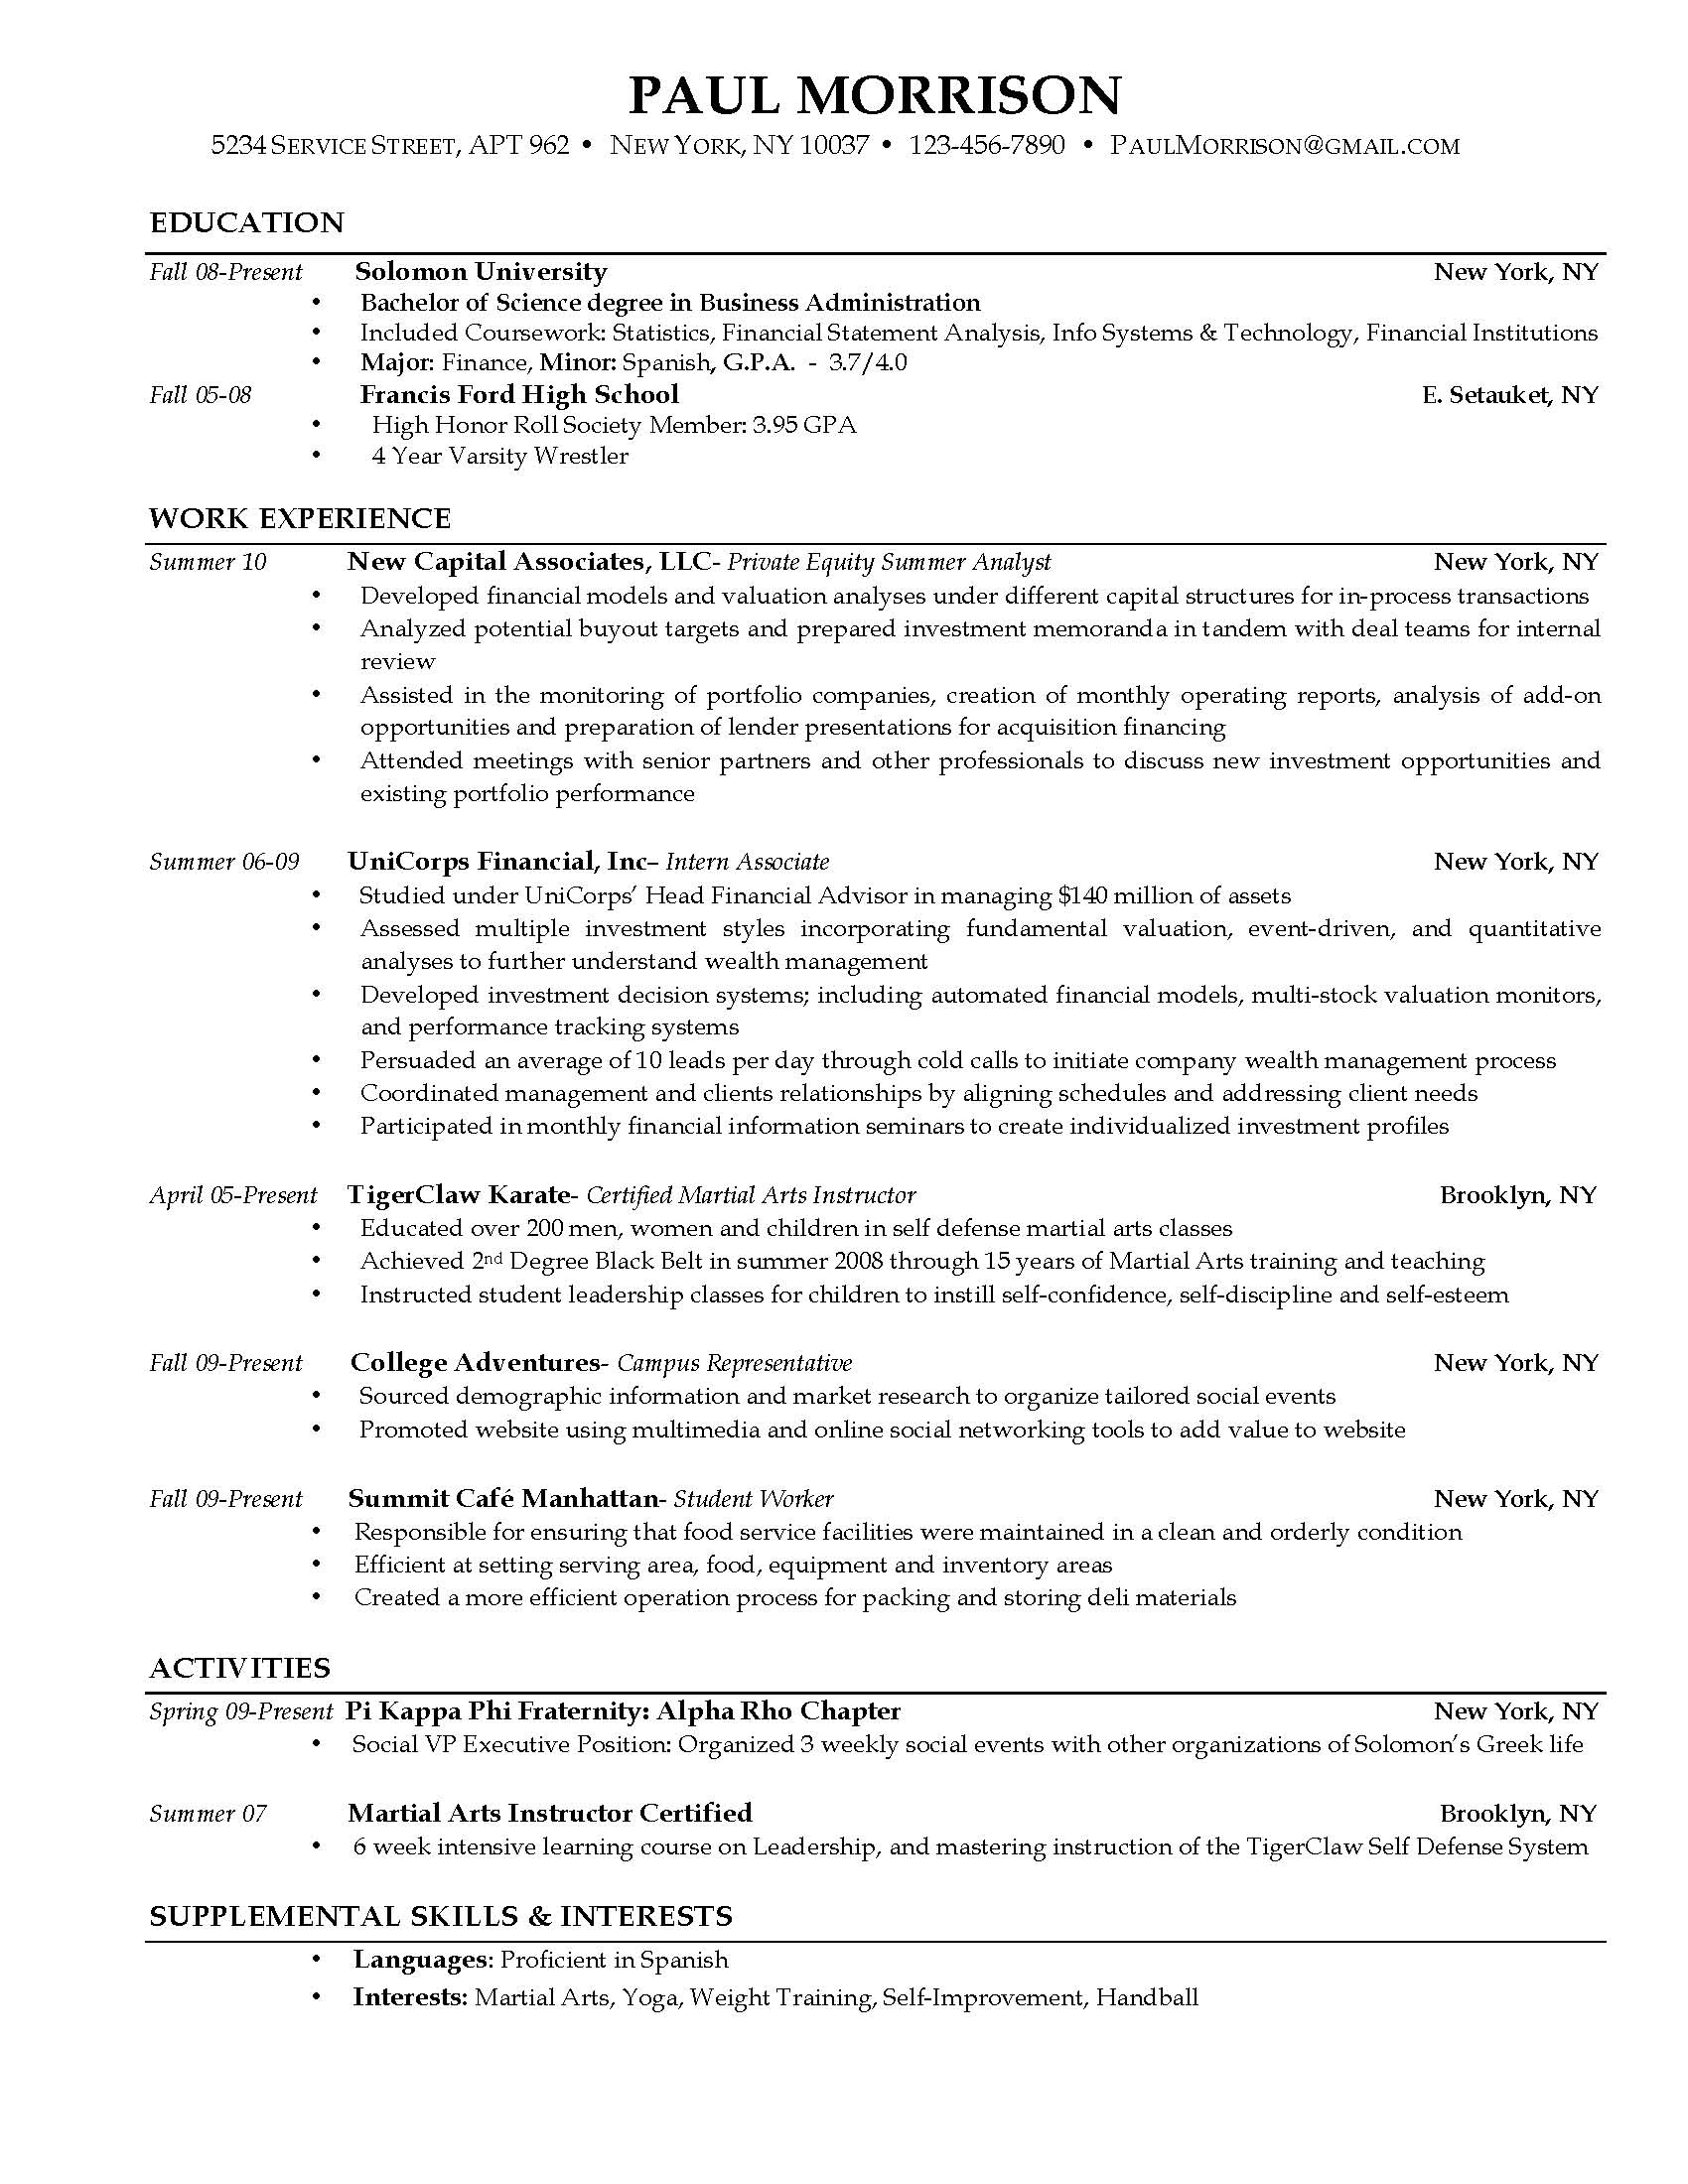 College Student Resume Example Sample classifiedsfree higzUHPt 